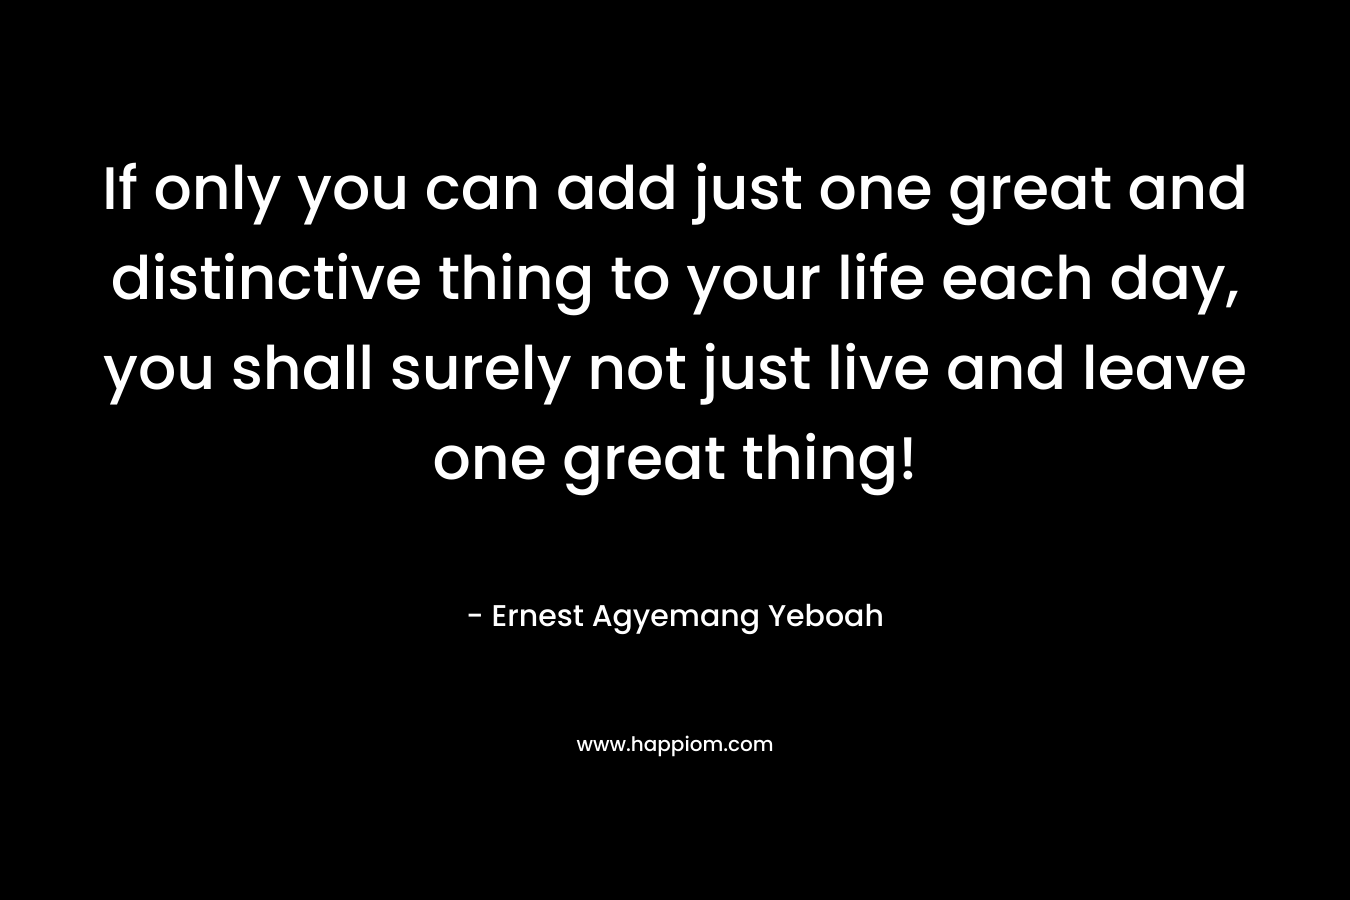 If only you can add just one great and distinctive thing to your life each day, you shall surely not just live and leave one great thing!